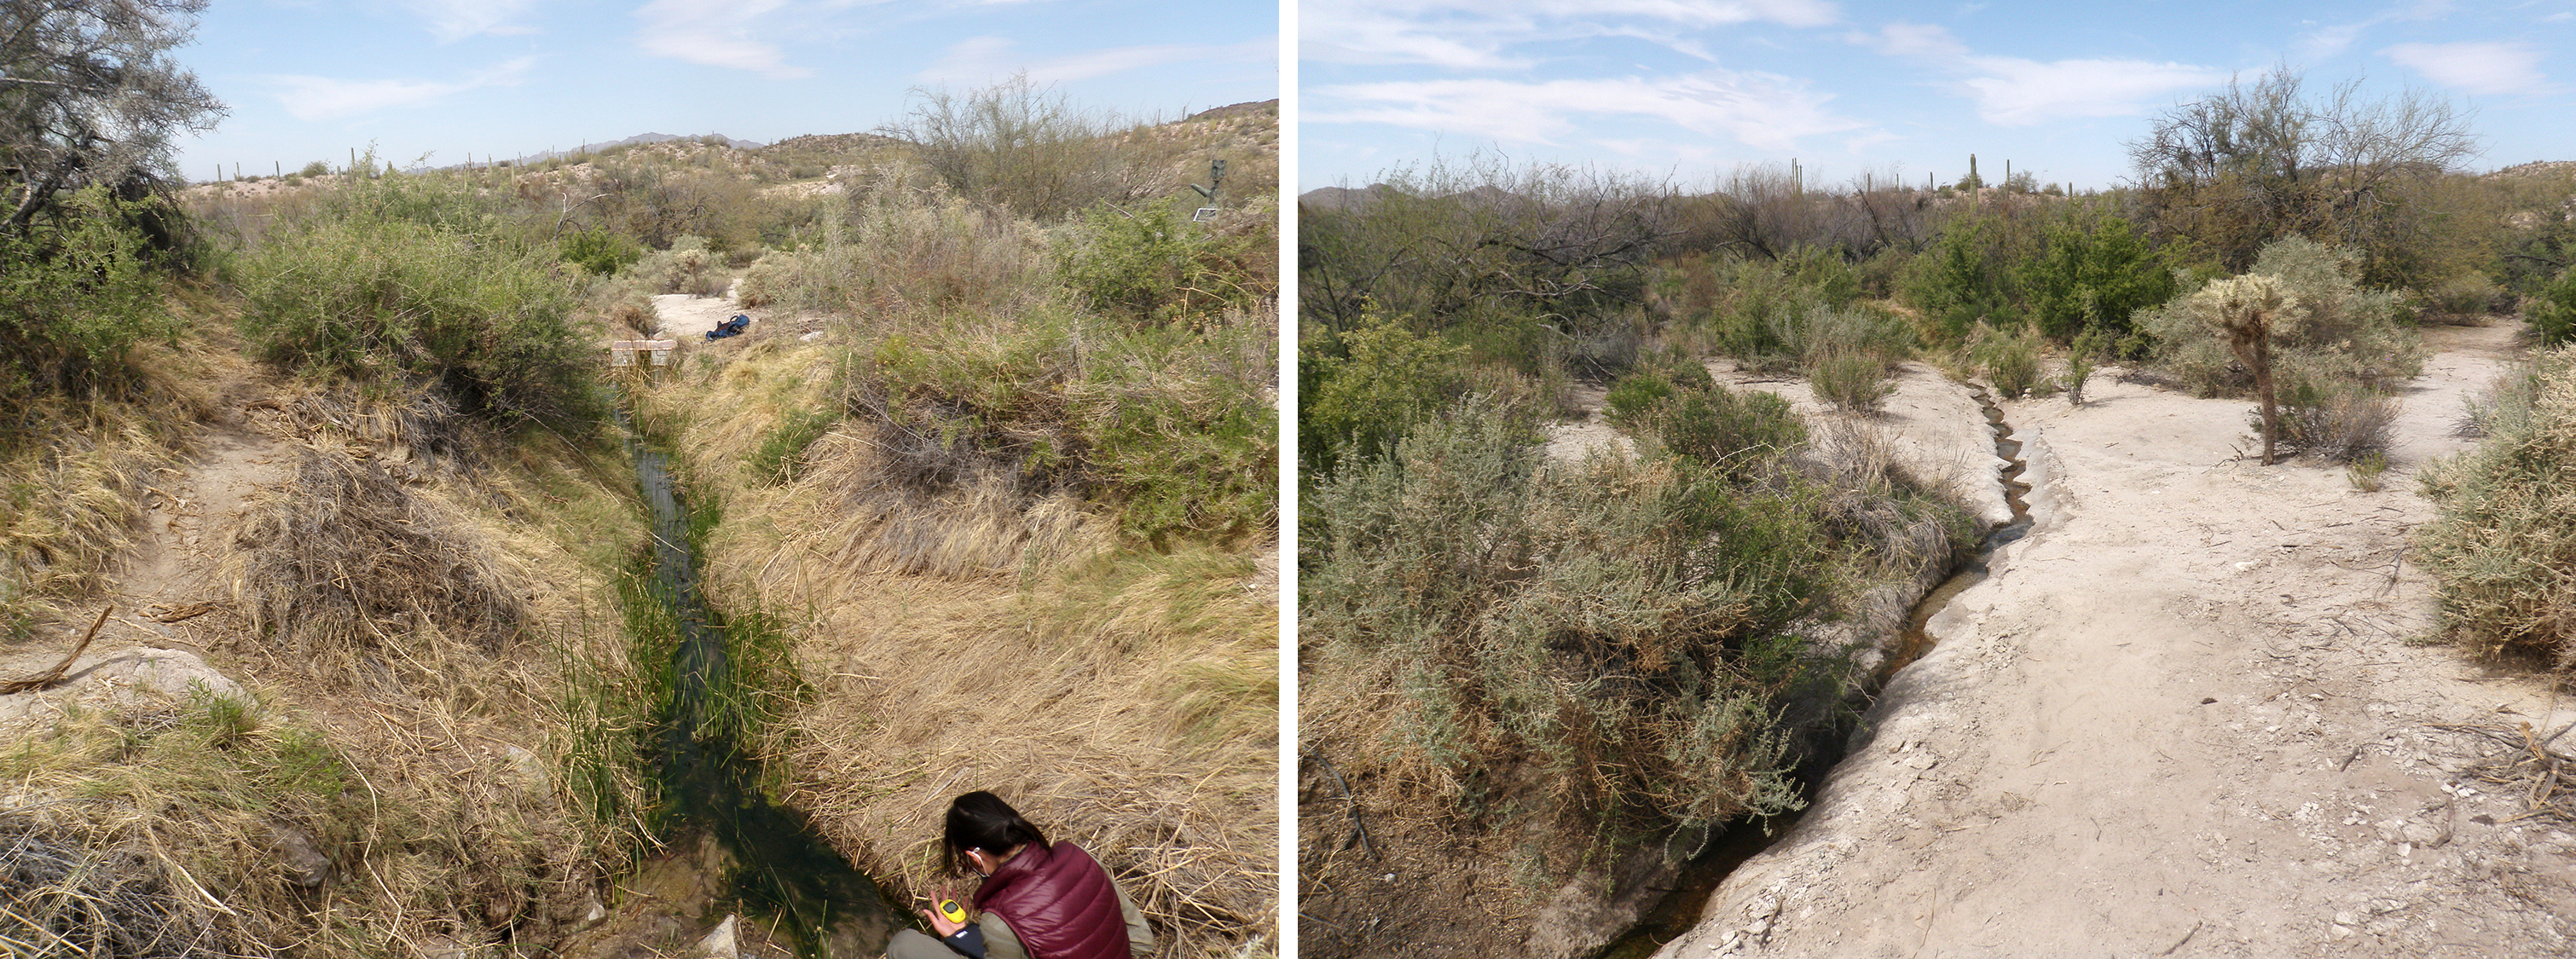 Two photos. At left, a thin stream of water passes through dried grasses and desert shrubs. At right, an even thinner squiggly stream passes over cement.